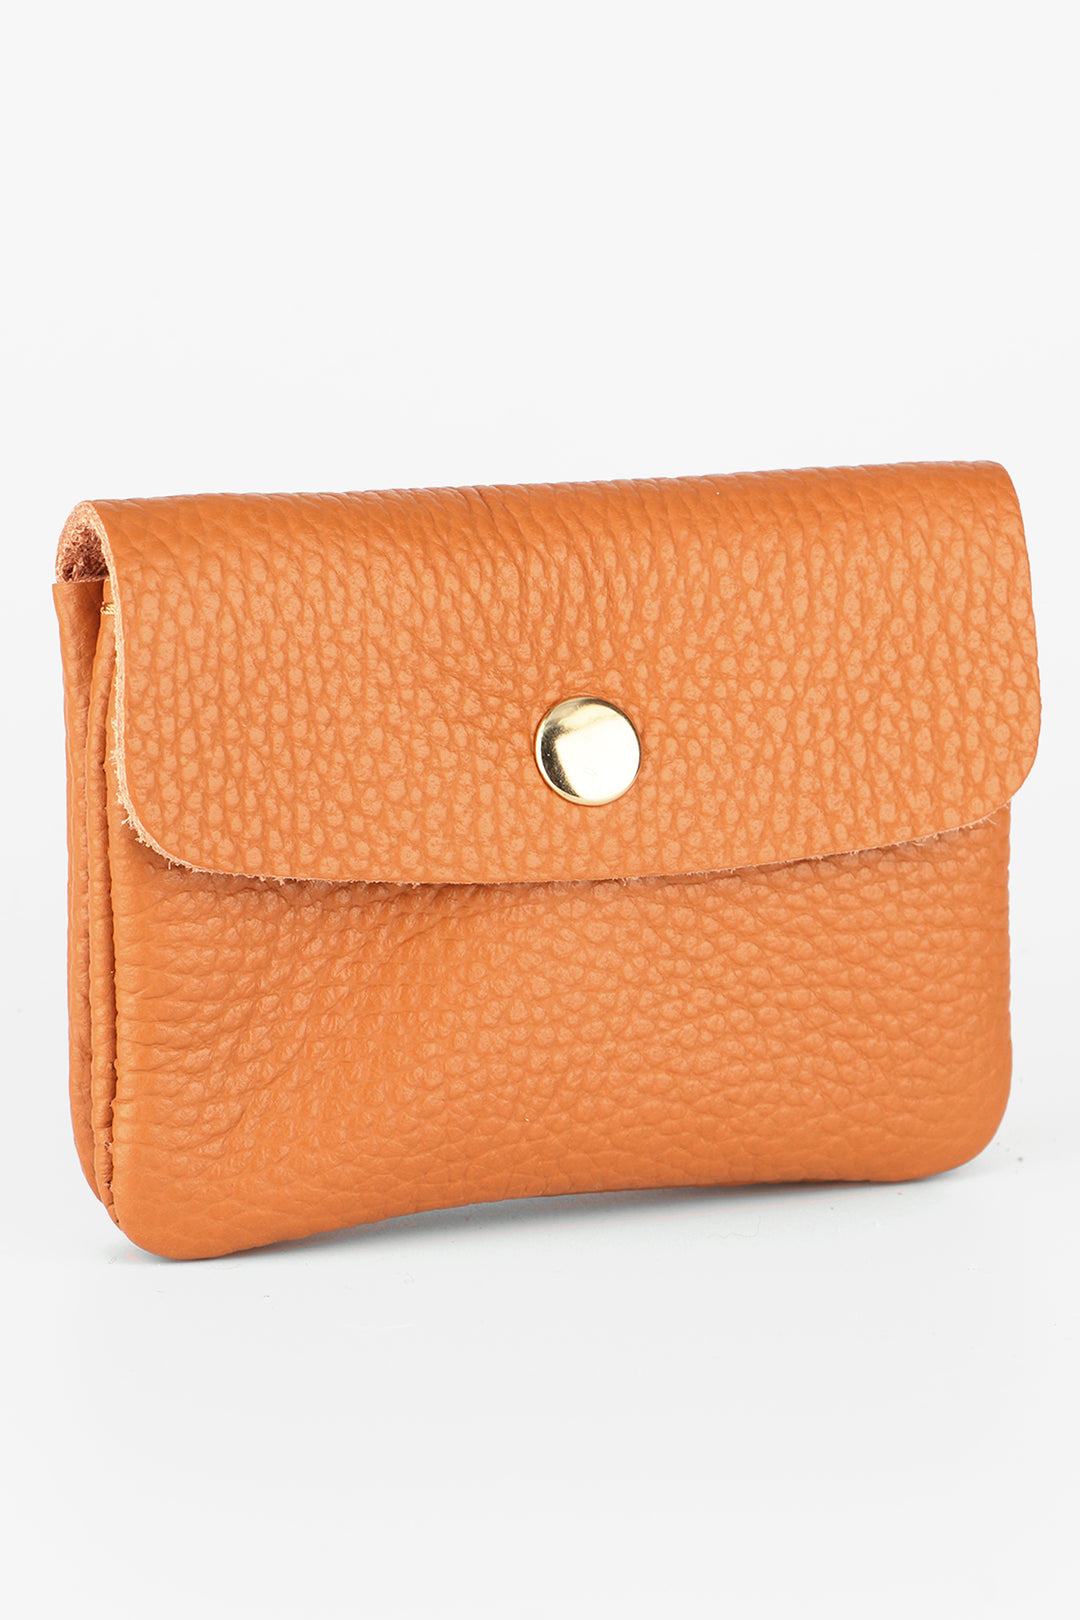 tan coloured leather coin purse with a snap button fastening